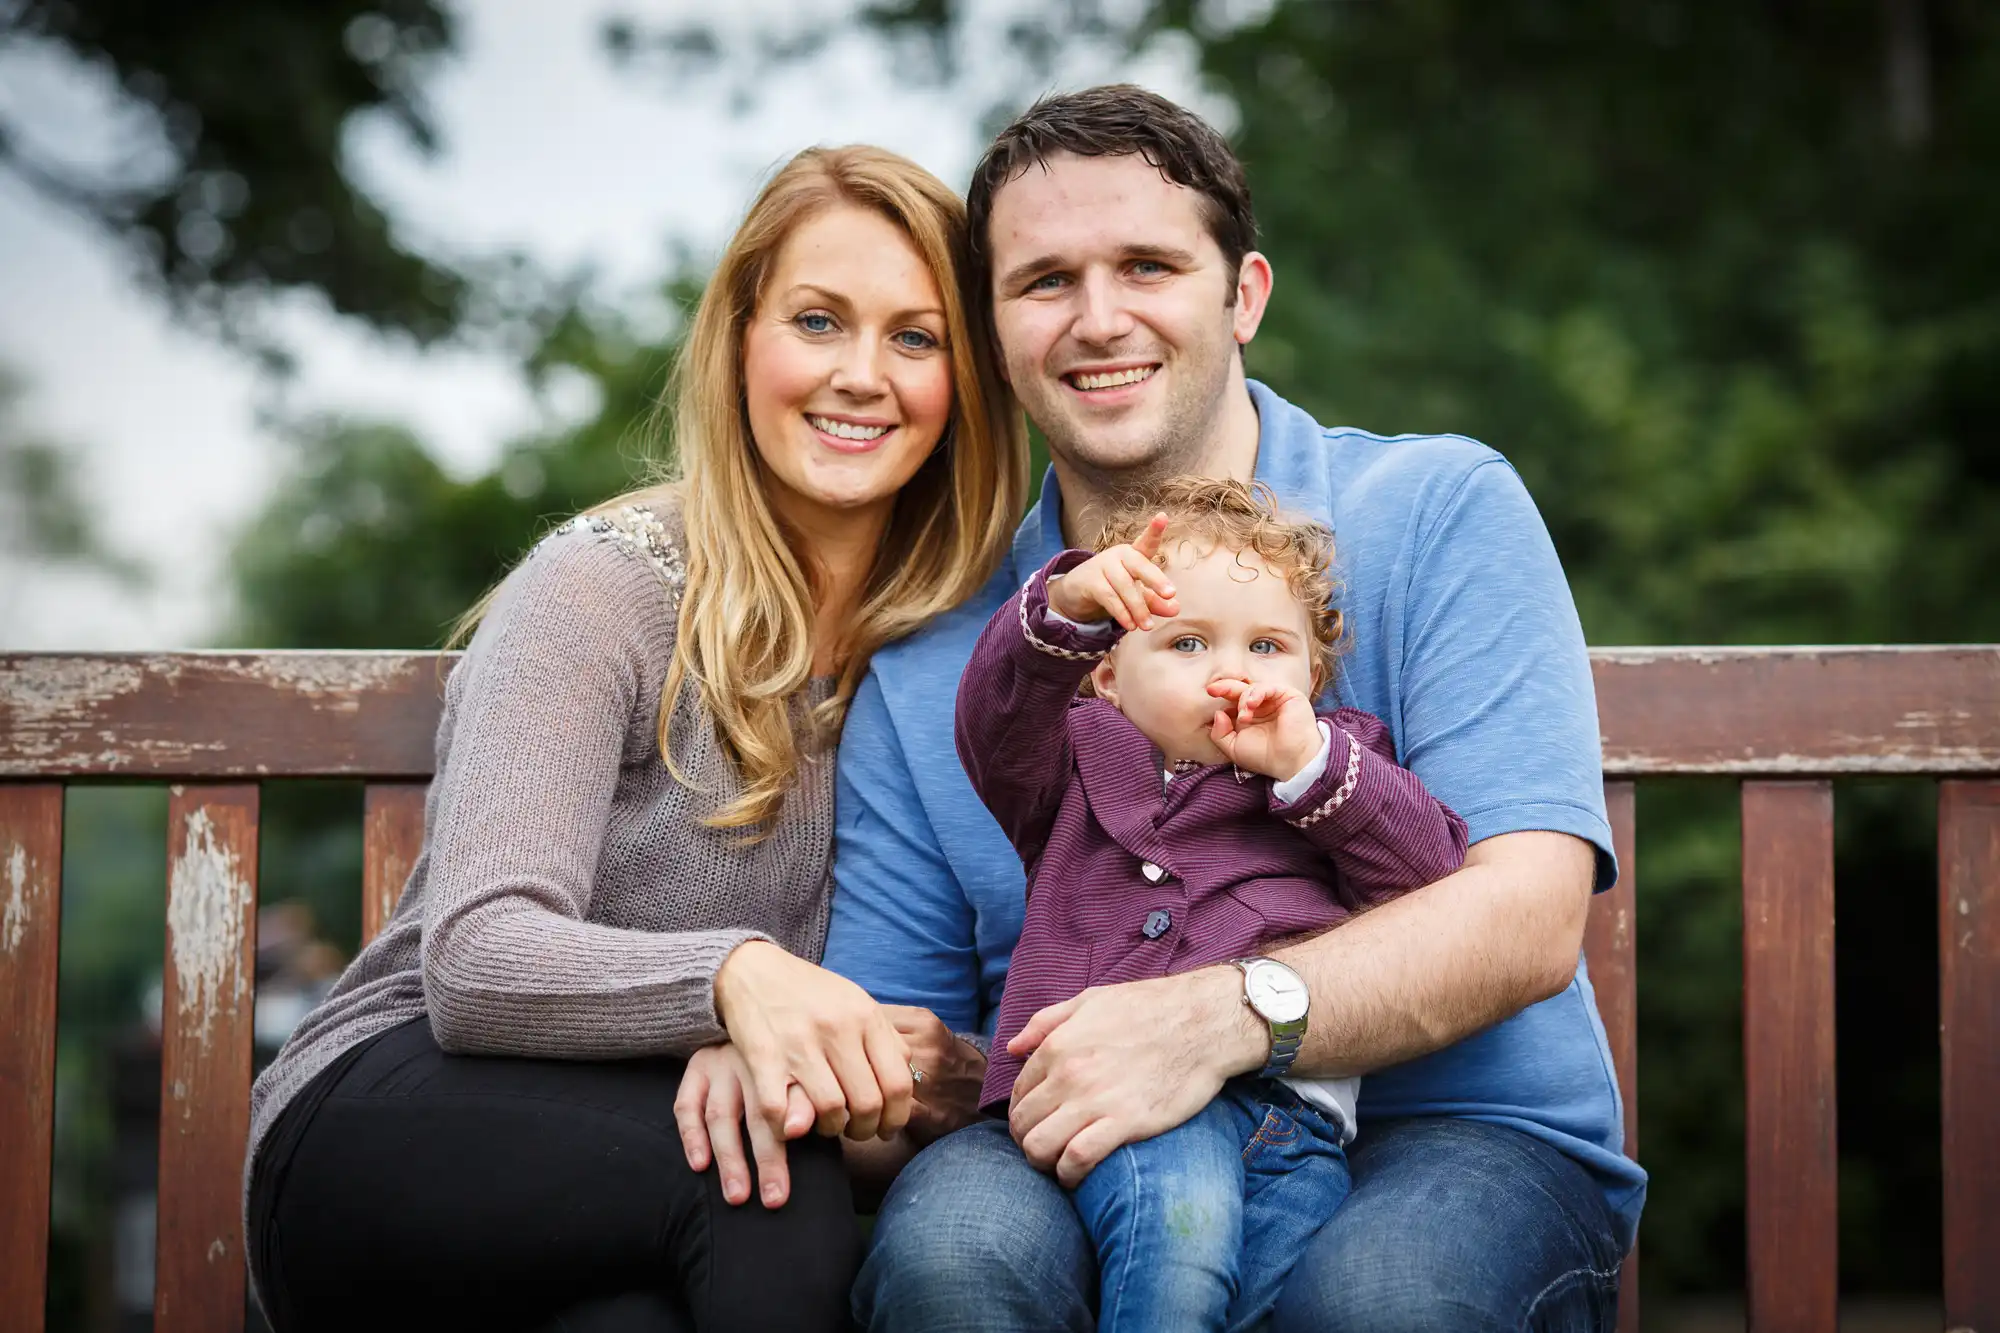 A young family with a toddler sitting together on a park bench, smiling at the camera.